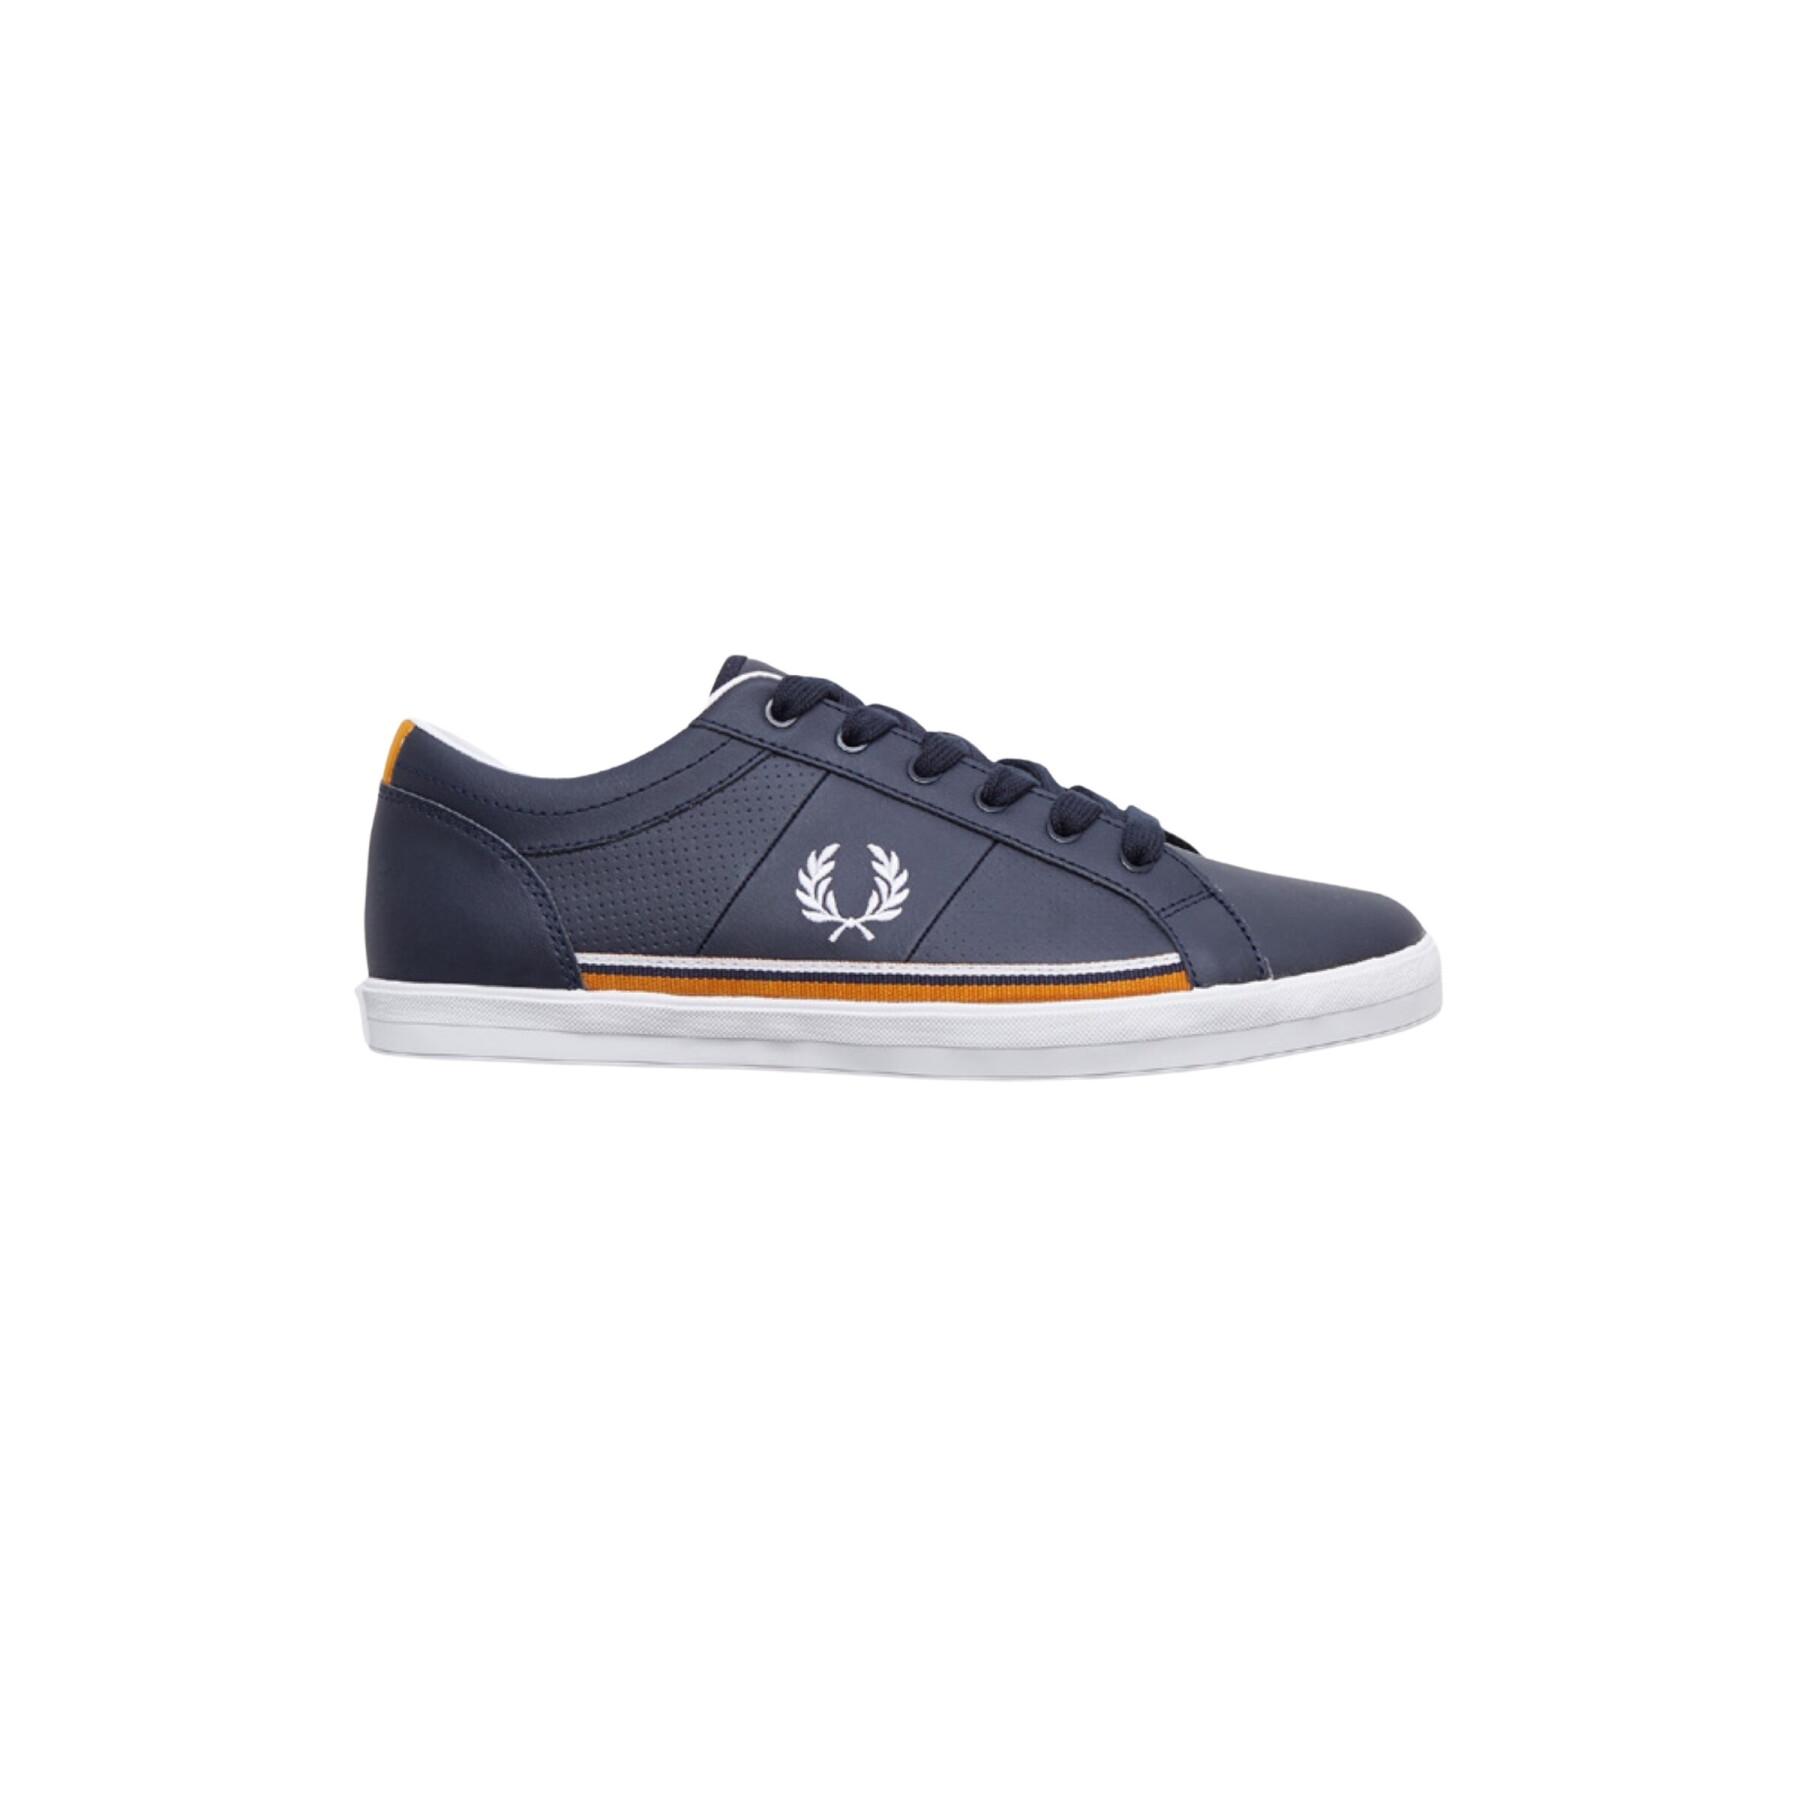 Formadores Fred Perry Baseline perf